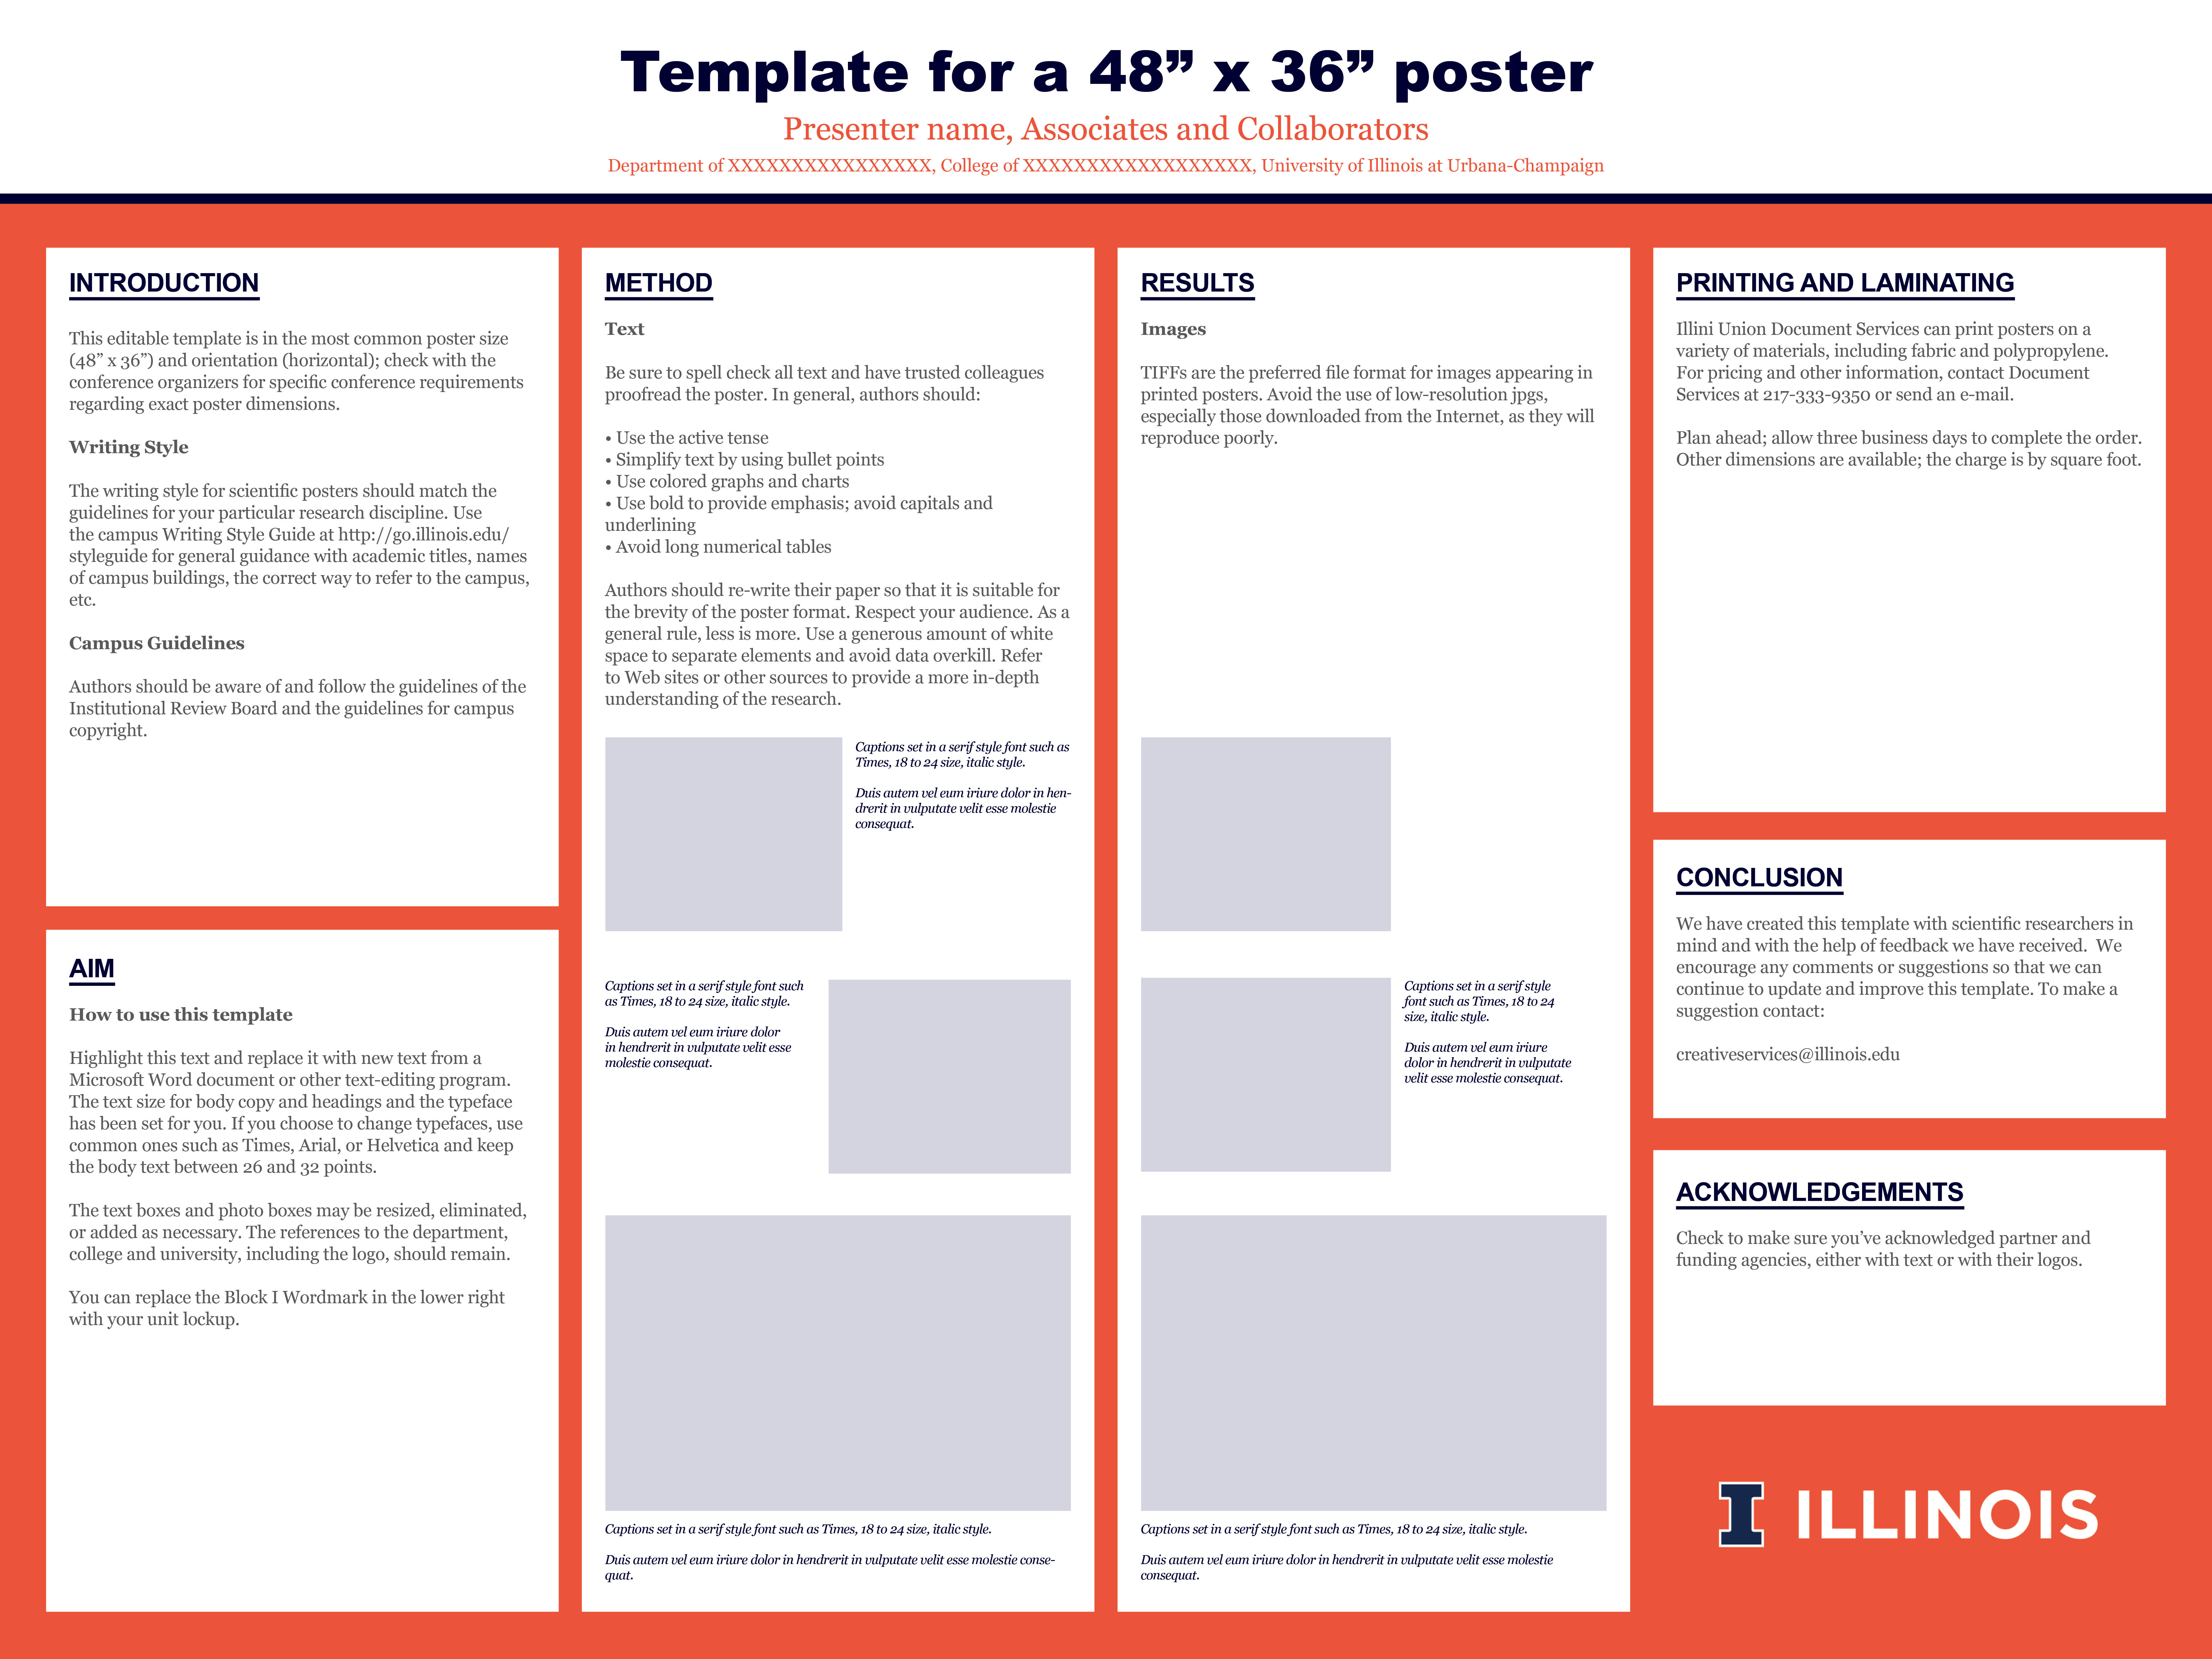 Research Poster | Campus Templates | Public Affairs | Illinois In Powerpoint Presentation Template Size